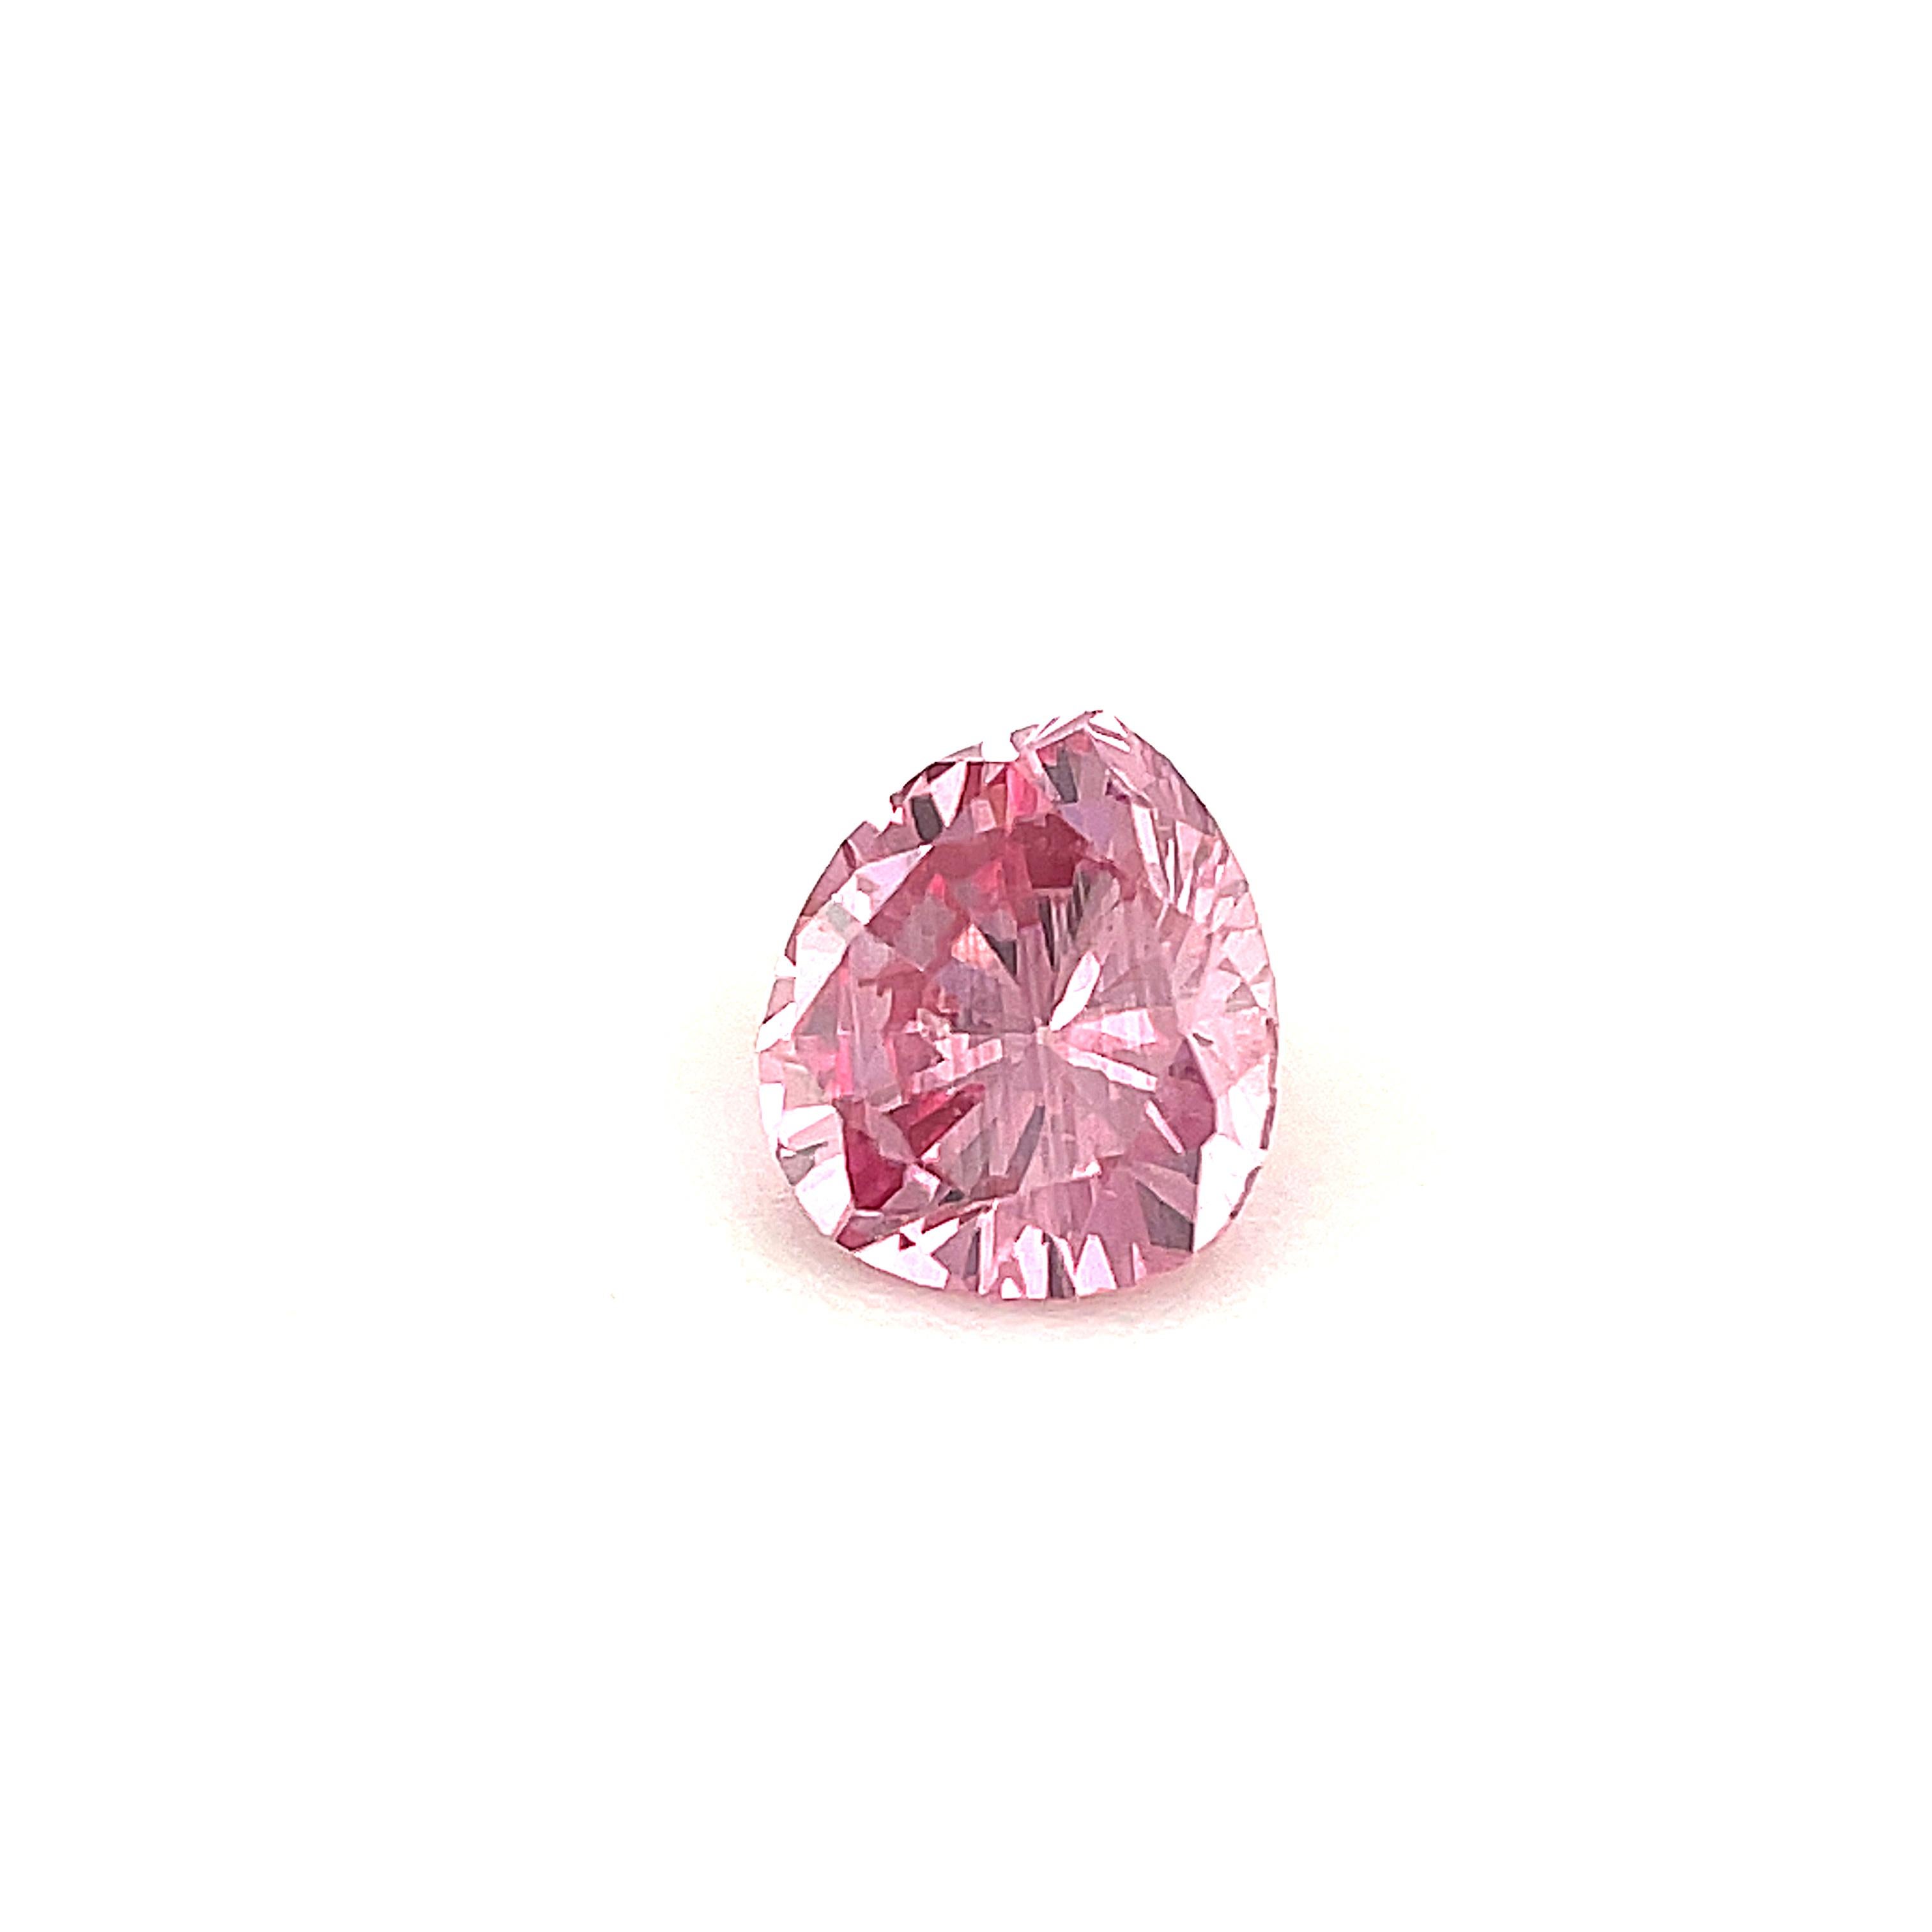 This extremely rare, natural pink diamond weighs .24 carat and is accompanied by a Gemological Institute of America (GIA) Colored Diamond Grading Report stating its color as 